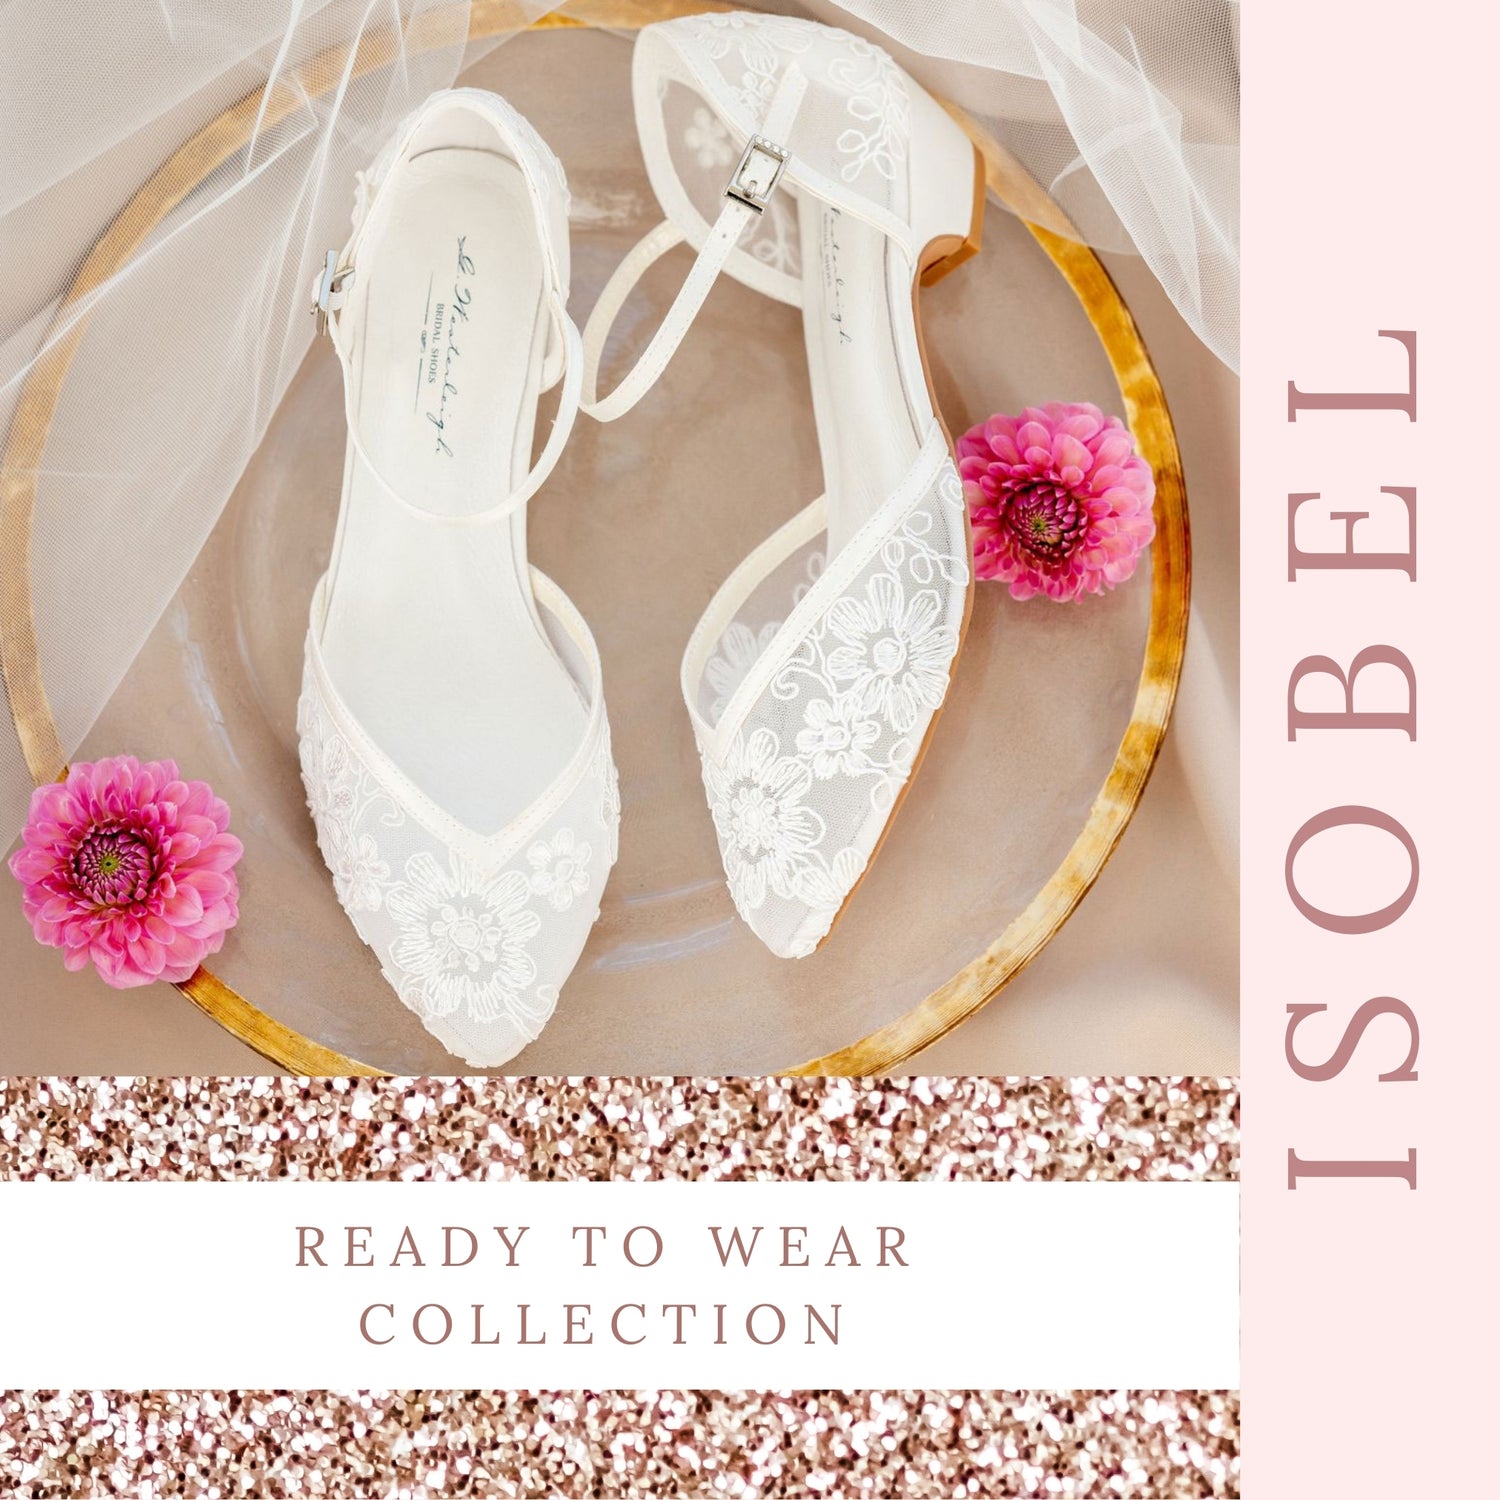 shoes-for-wedding-guest-low-heel